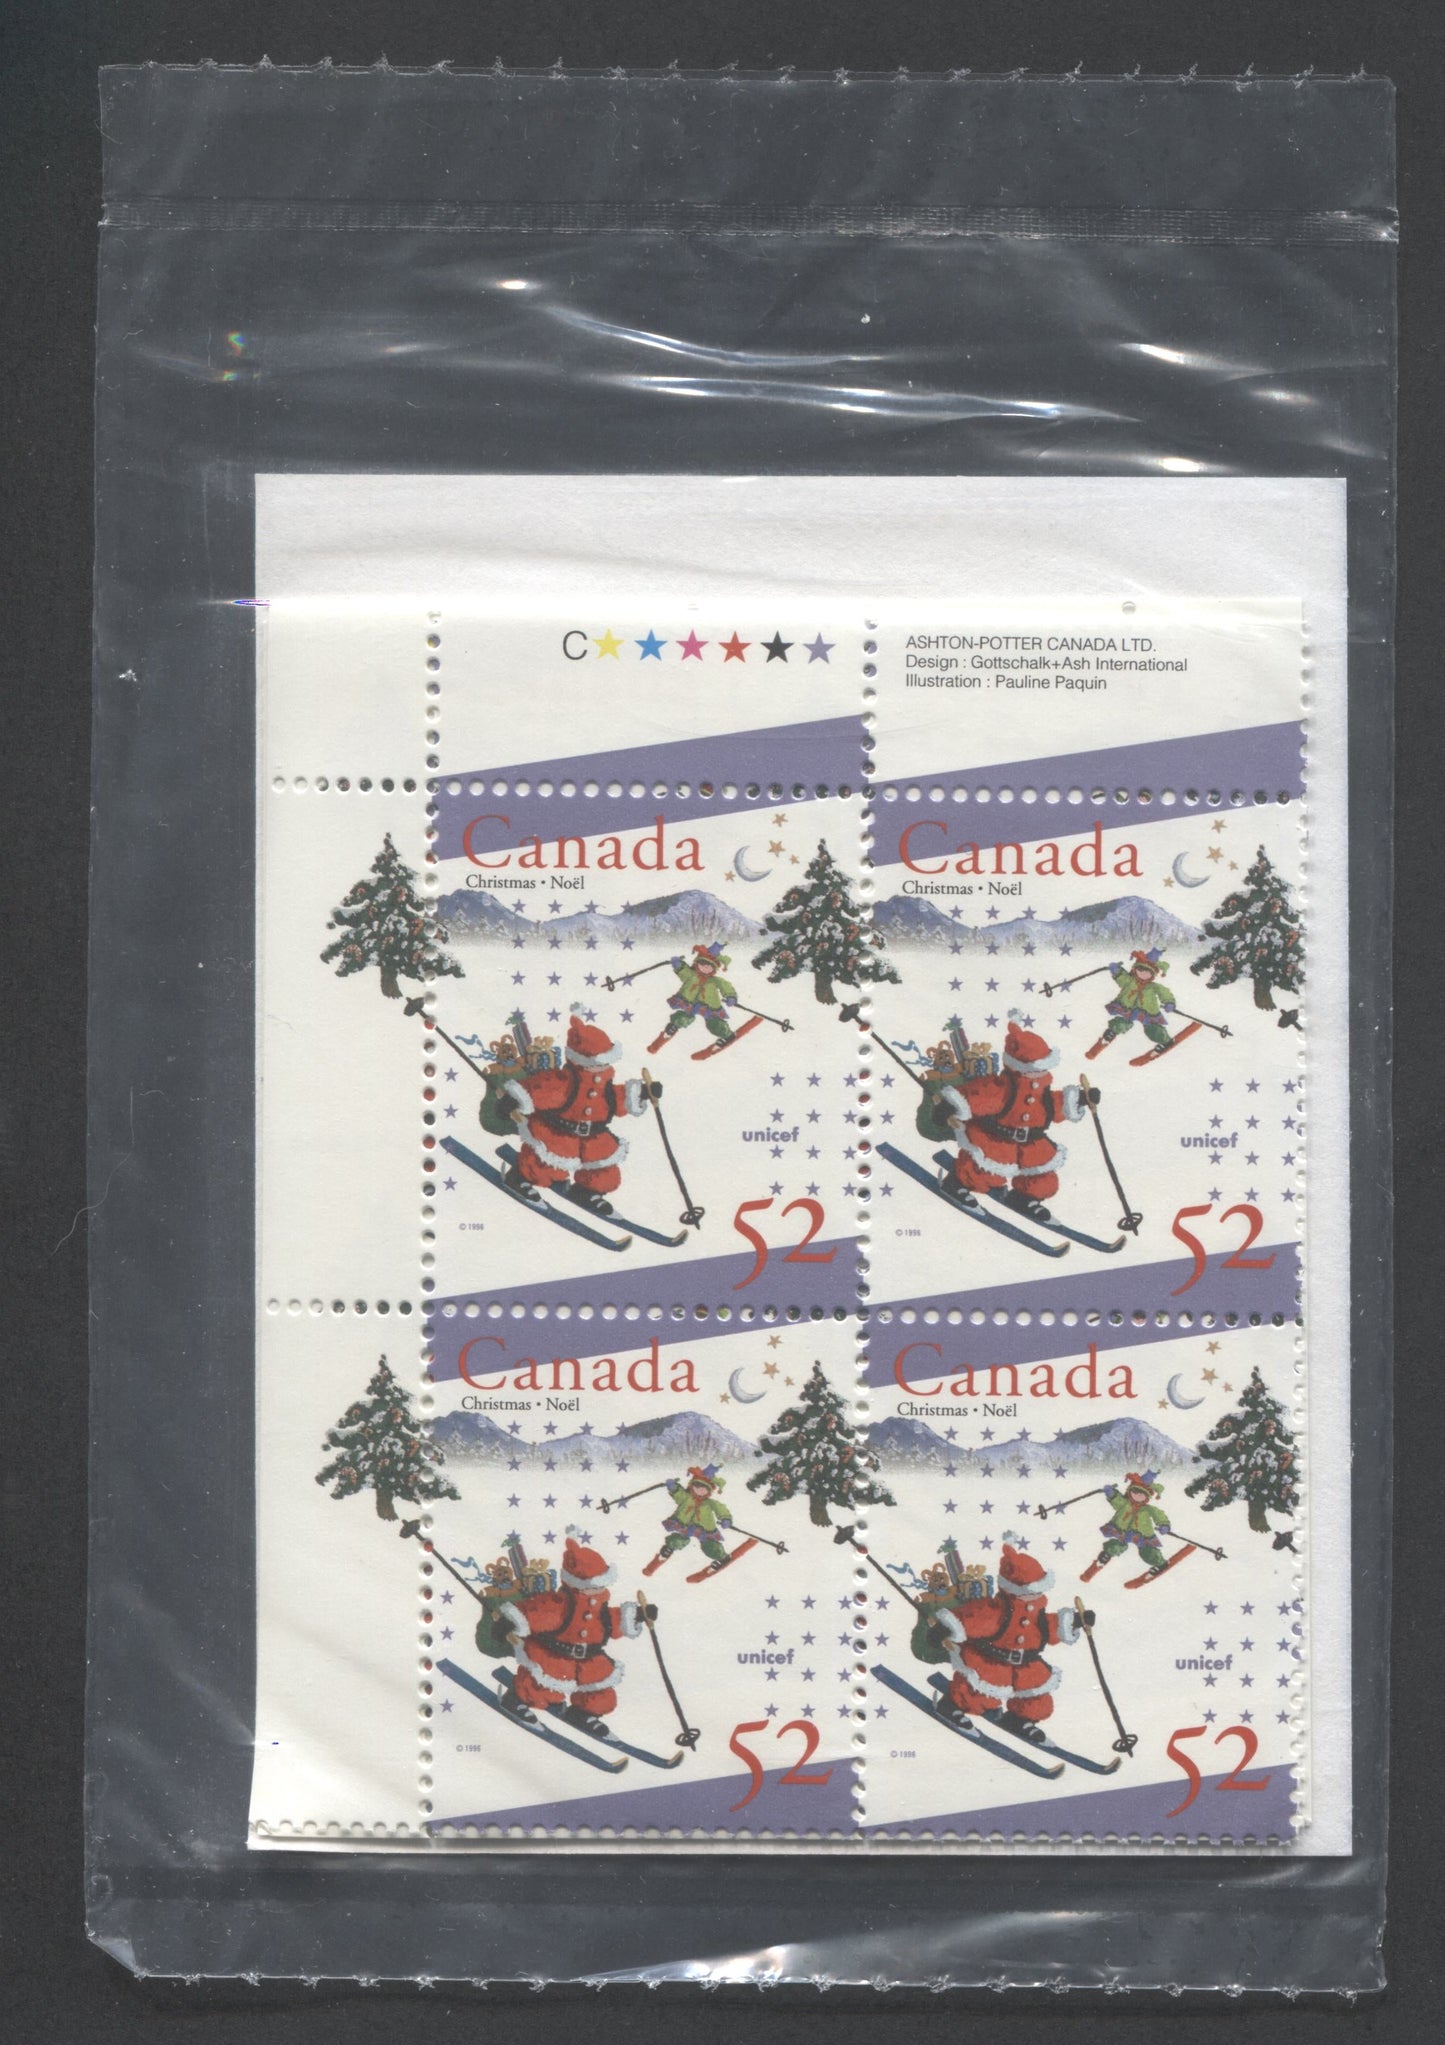 Lot 301 Canada #1628 52c Multicolored Santa & Elf Skiing 1996 Unicef & Christmas, Canada Post Sealed Pack of Inscription Blocks on DF Paper With HB Type 6A Insert Card, VFNH, Unitrade Cat. $21